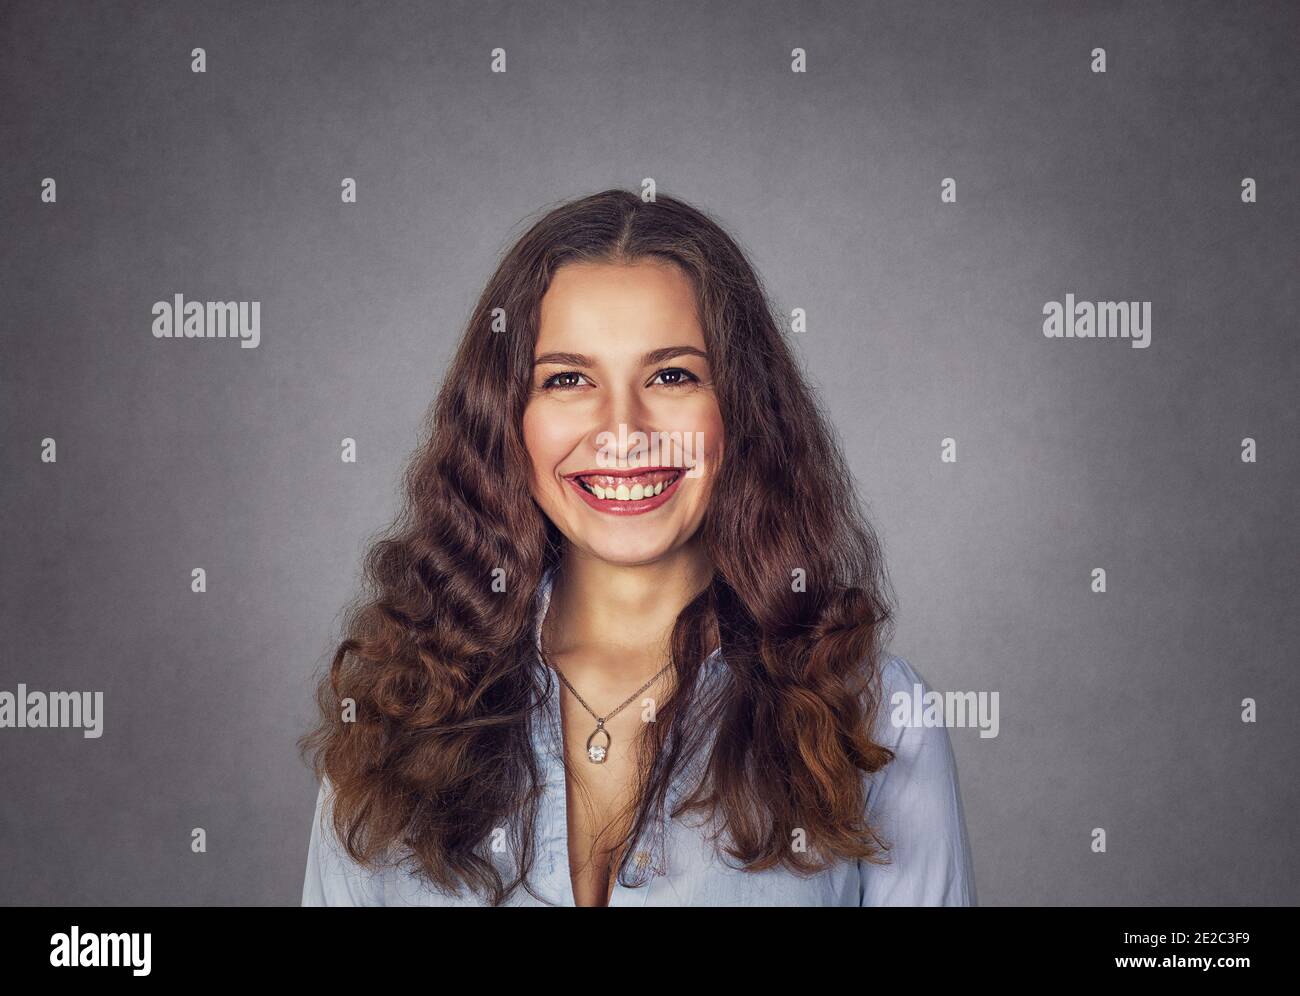 Closeup young woman with wavy hair showing toothy smile isolated on gray wall background. Positive face emotion. Stock Photo